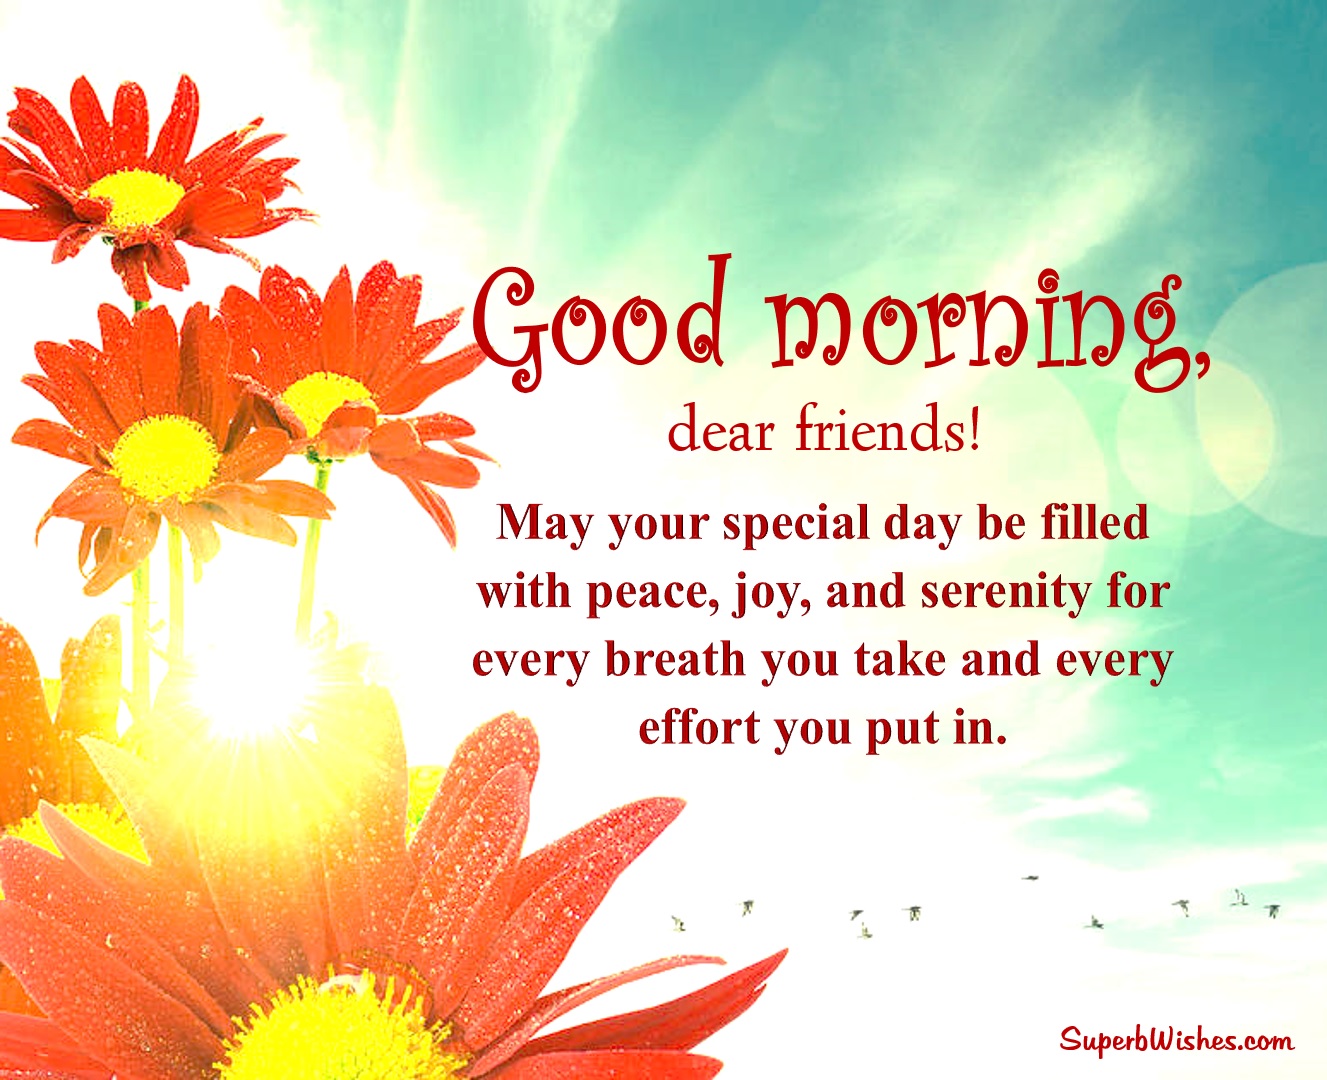 Good Morning Wishes For Friends Images - Joy & Serenity | SuperbWishes